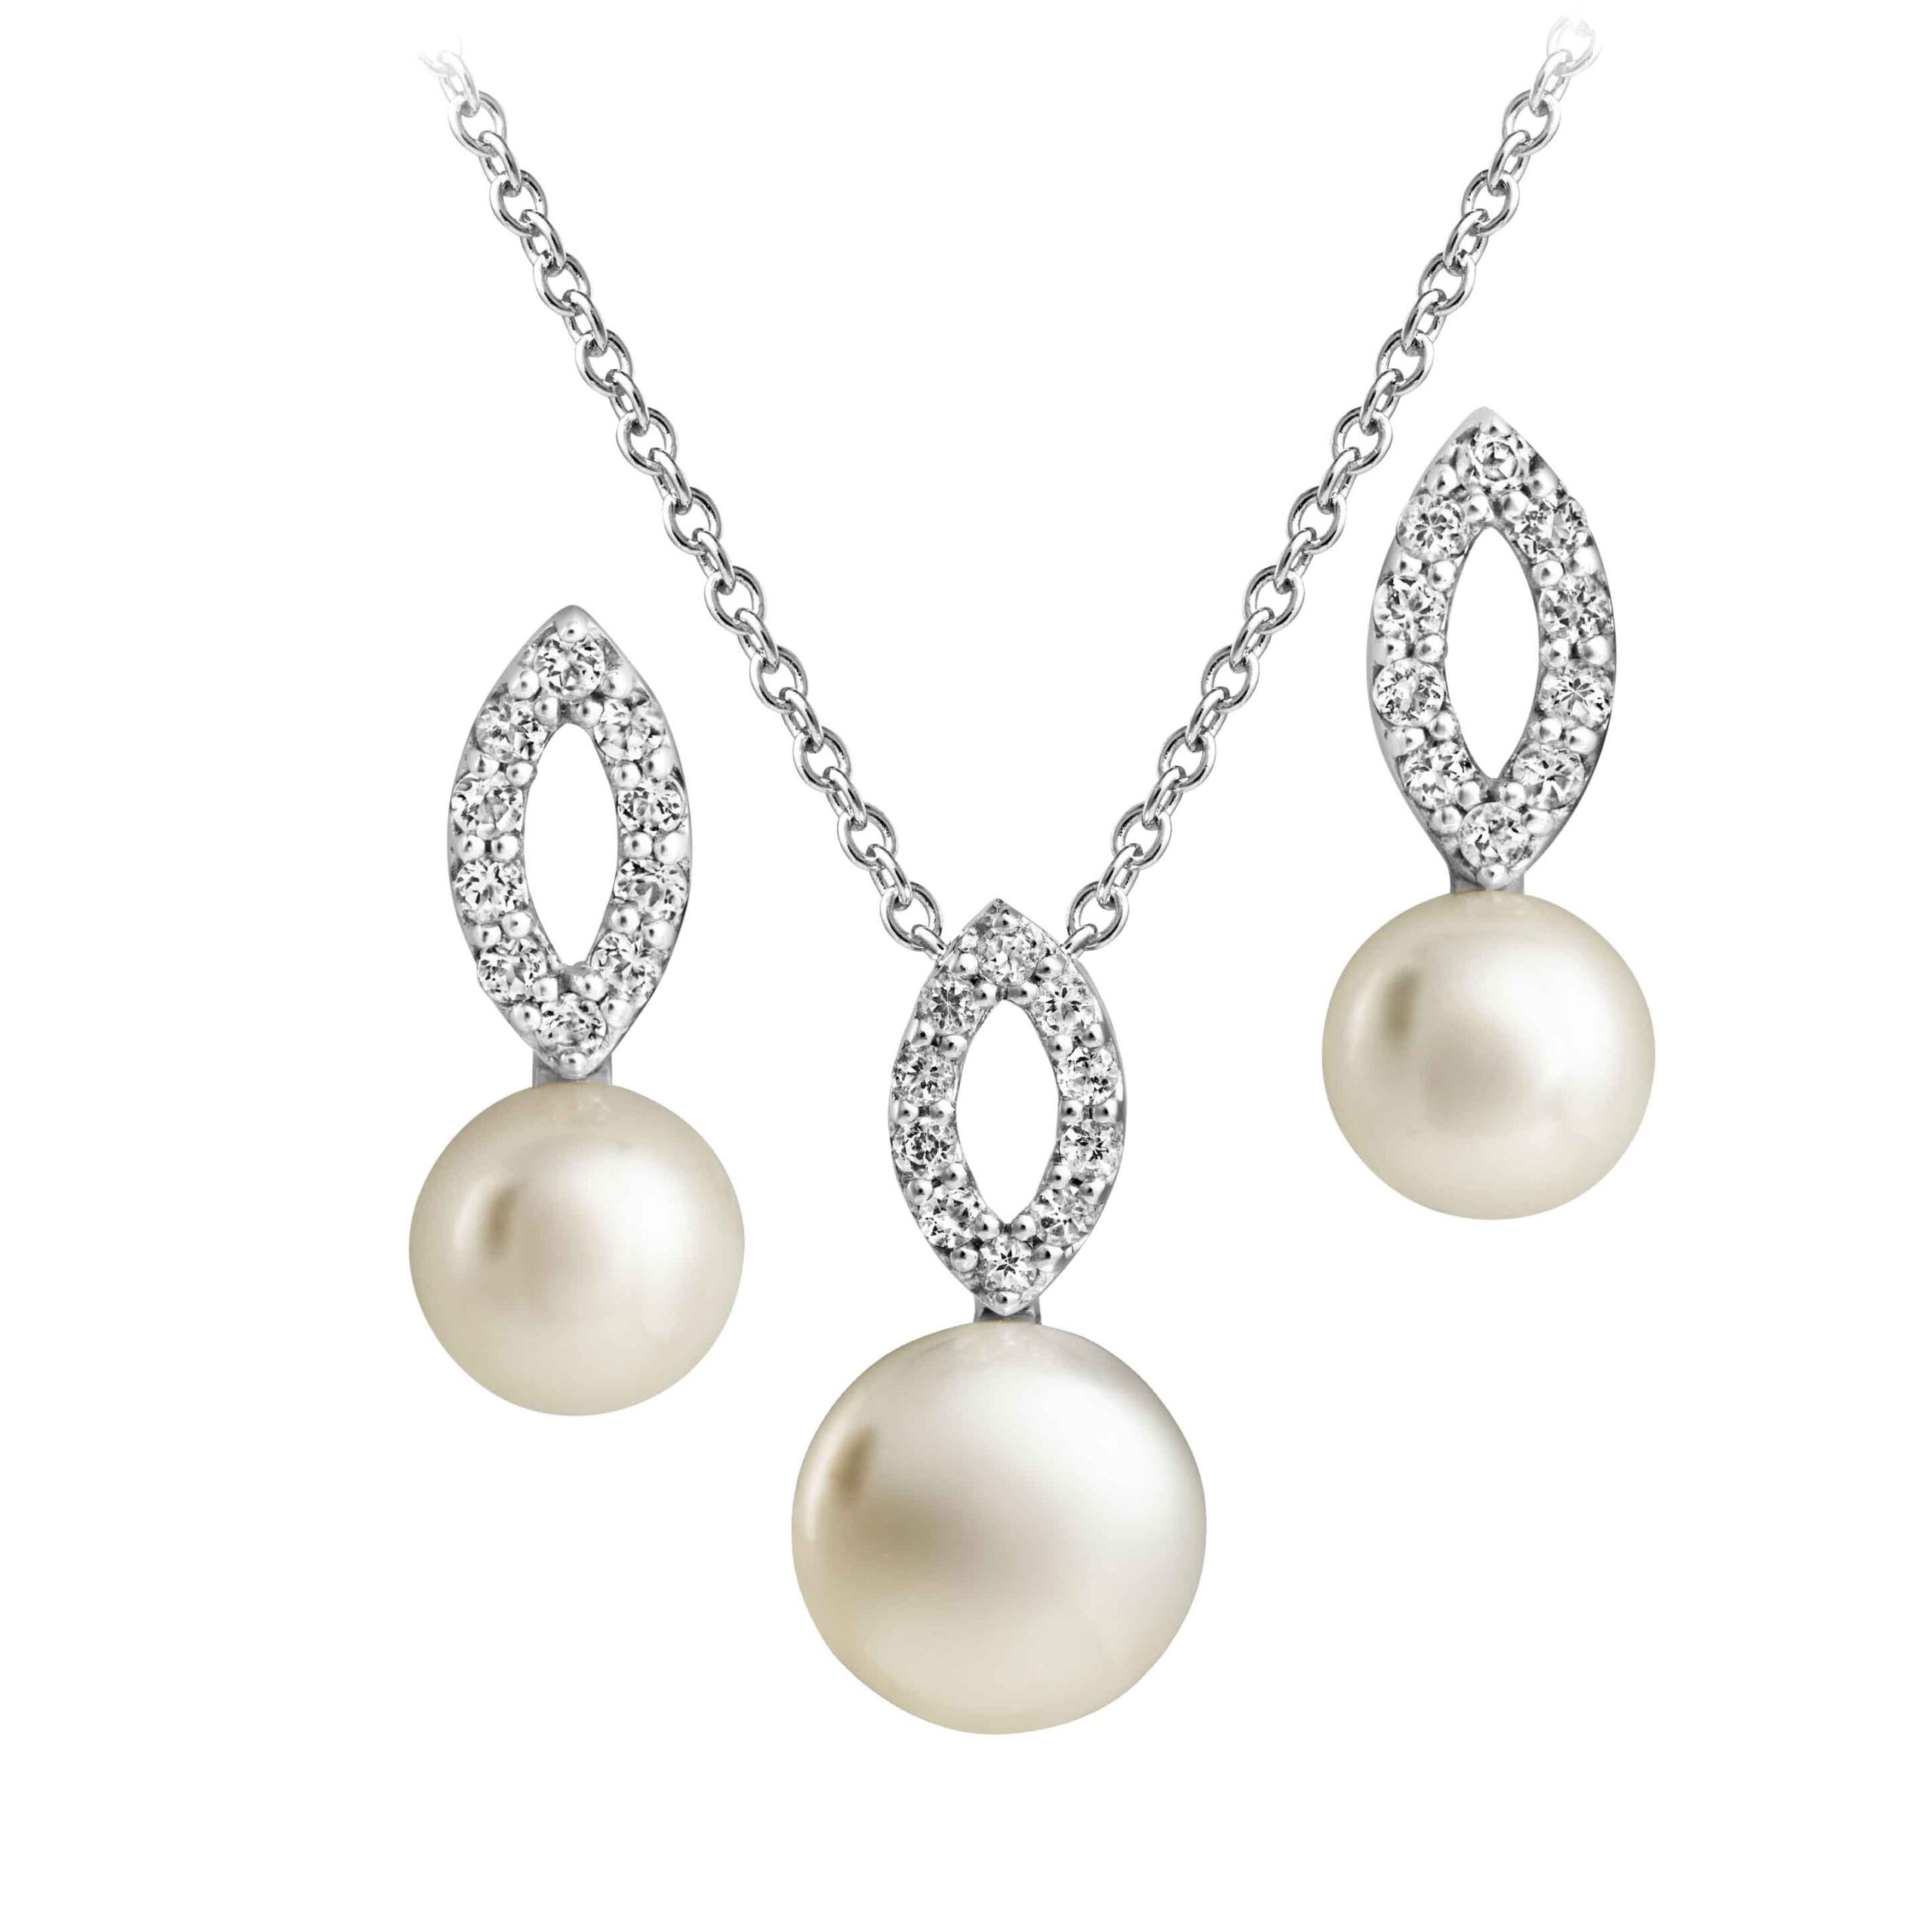 Pearl open cluster pendant and earring on Sally Thorntons jewellery blog from AA Thornton Kettering Northampton 